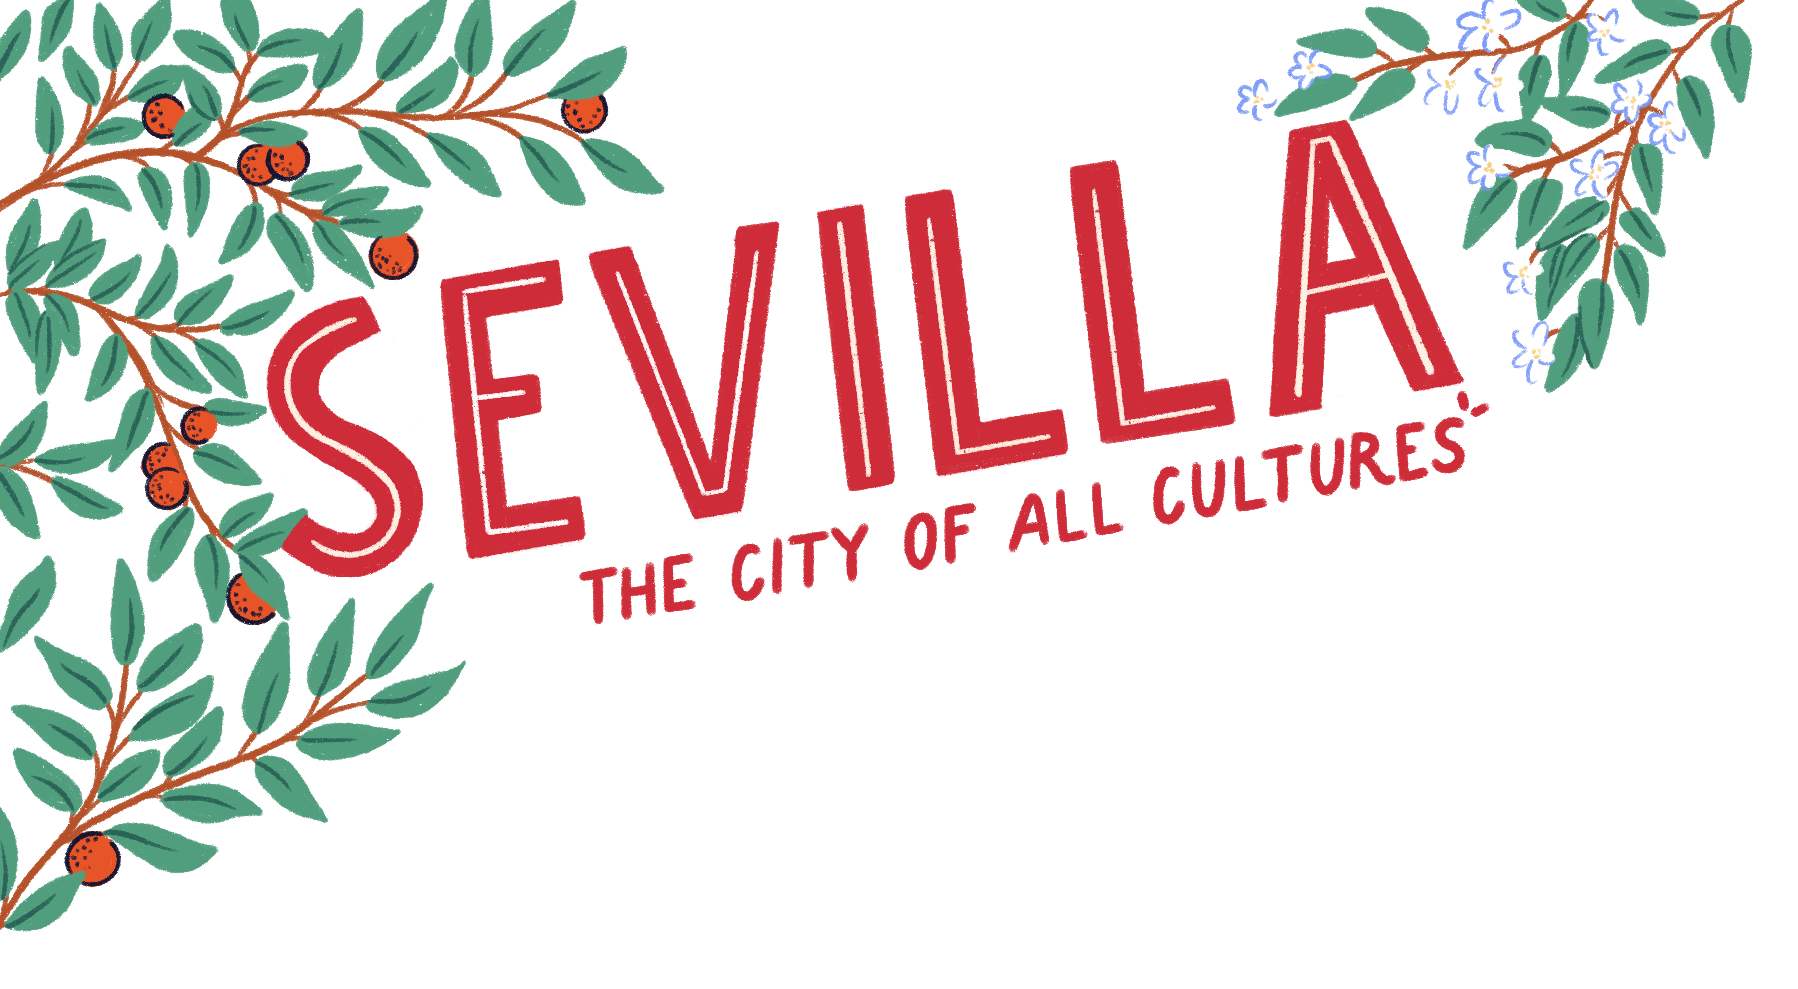 Seville, the city of all cultures